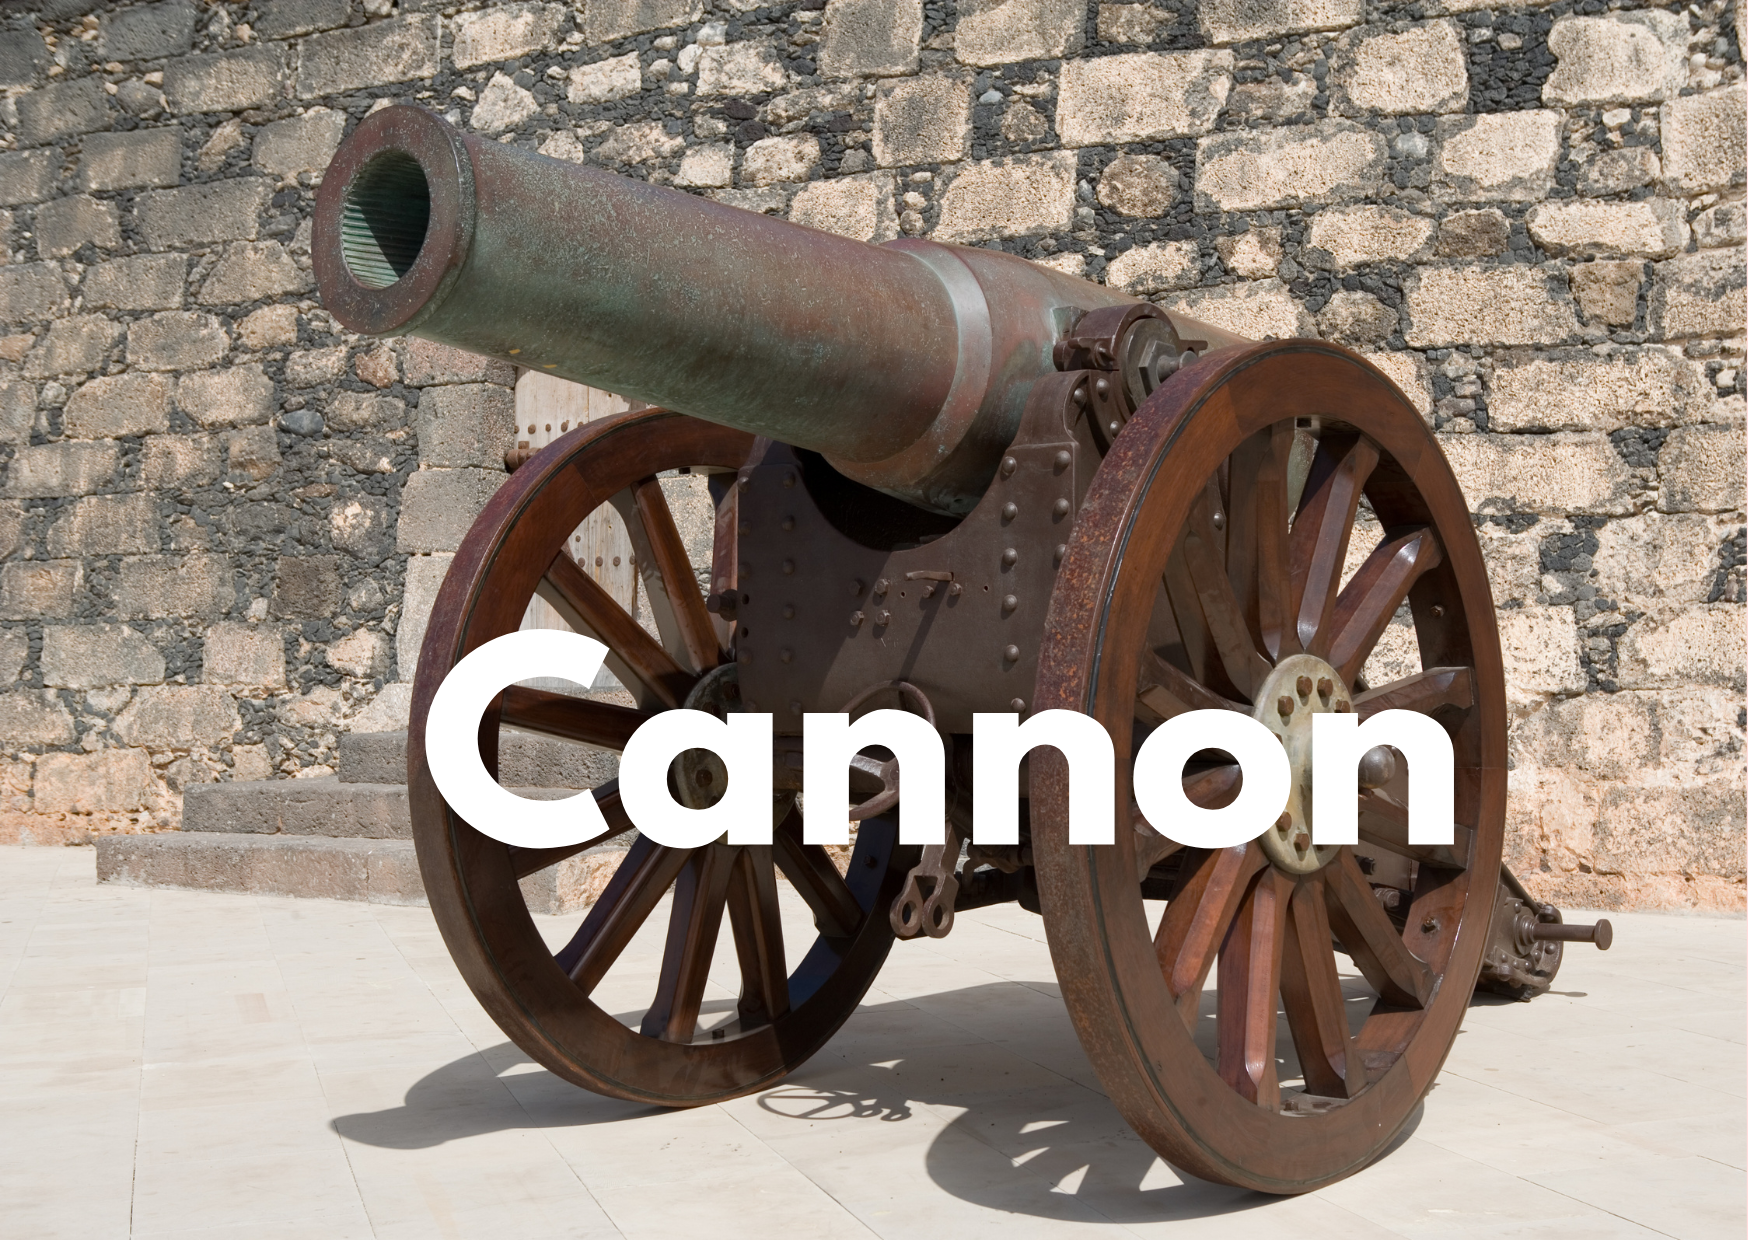 A picture of an old cannon and the caption "cannon"